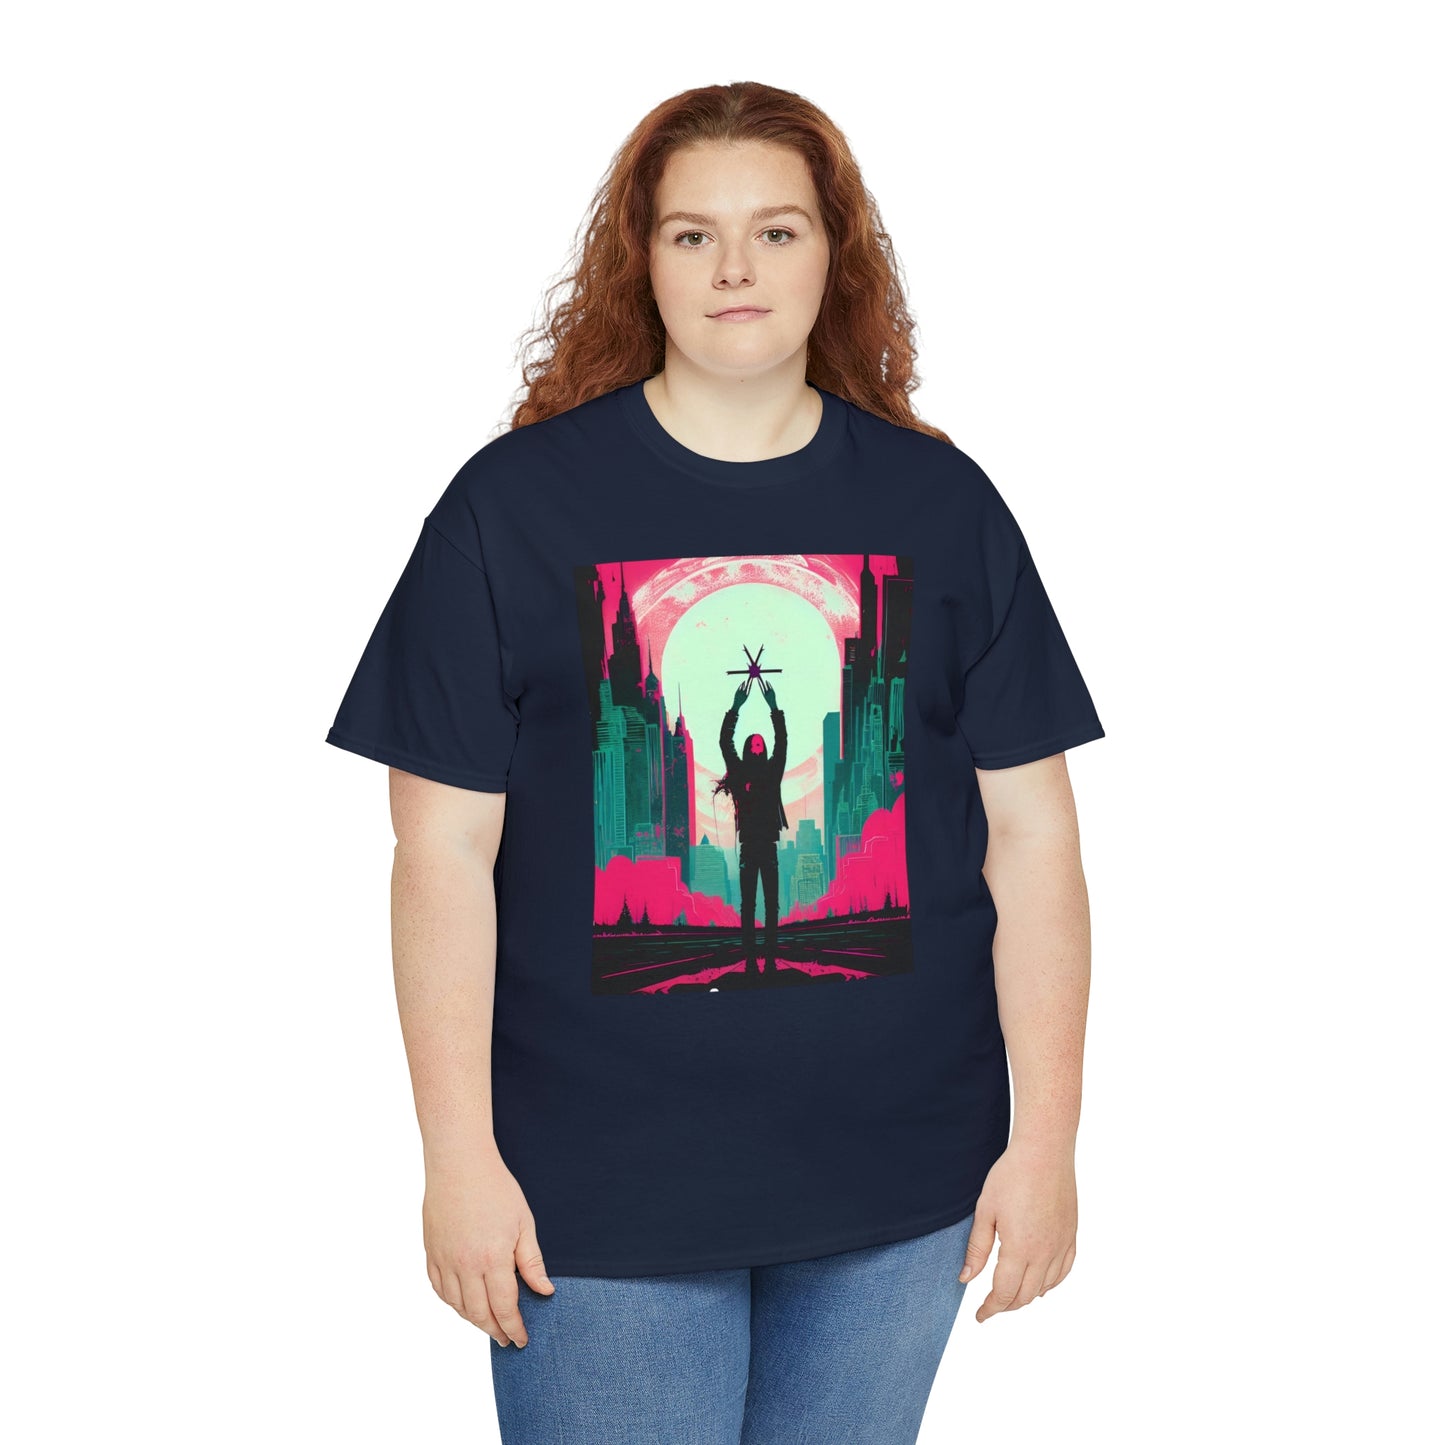 Woman wearing navy Last Hands Raised tee with red hair.